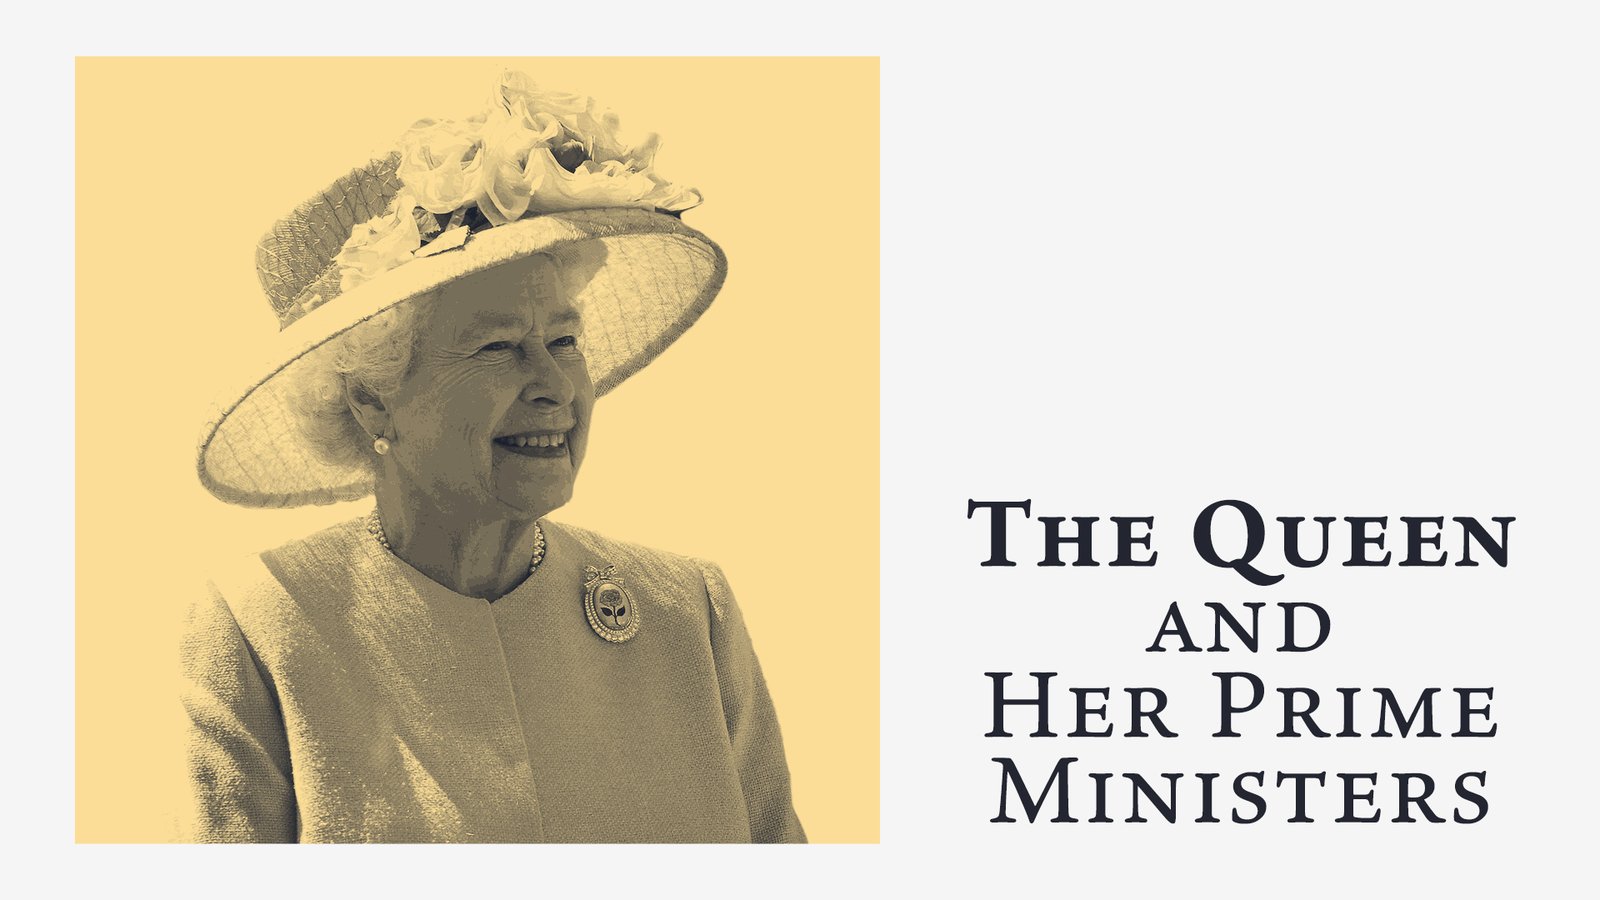 The Queen and Her Prime Ministers - The Balance of Power in the UK